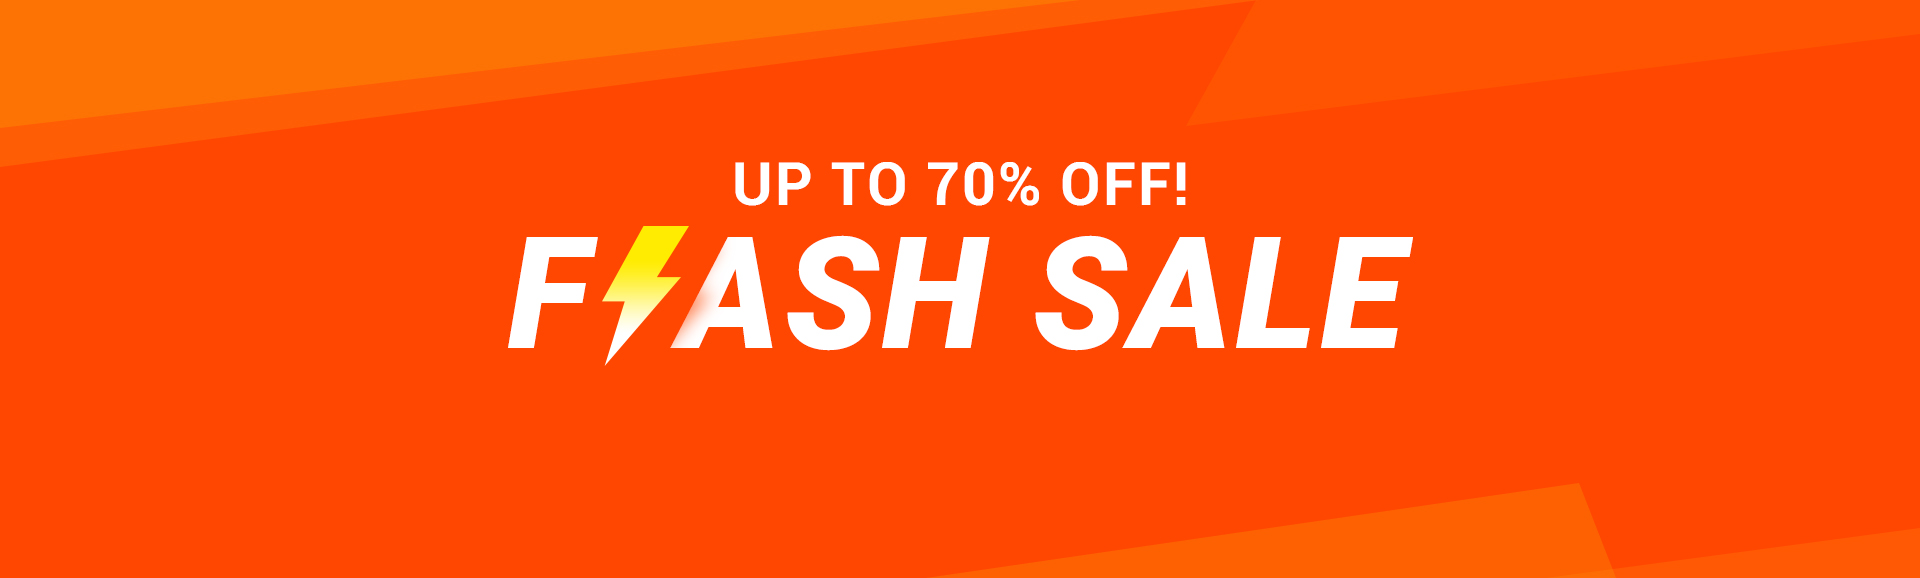 FLASH SALE UP TO 70% OFF!